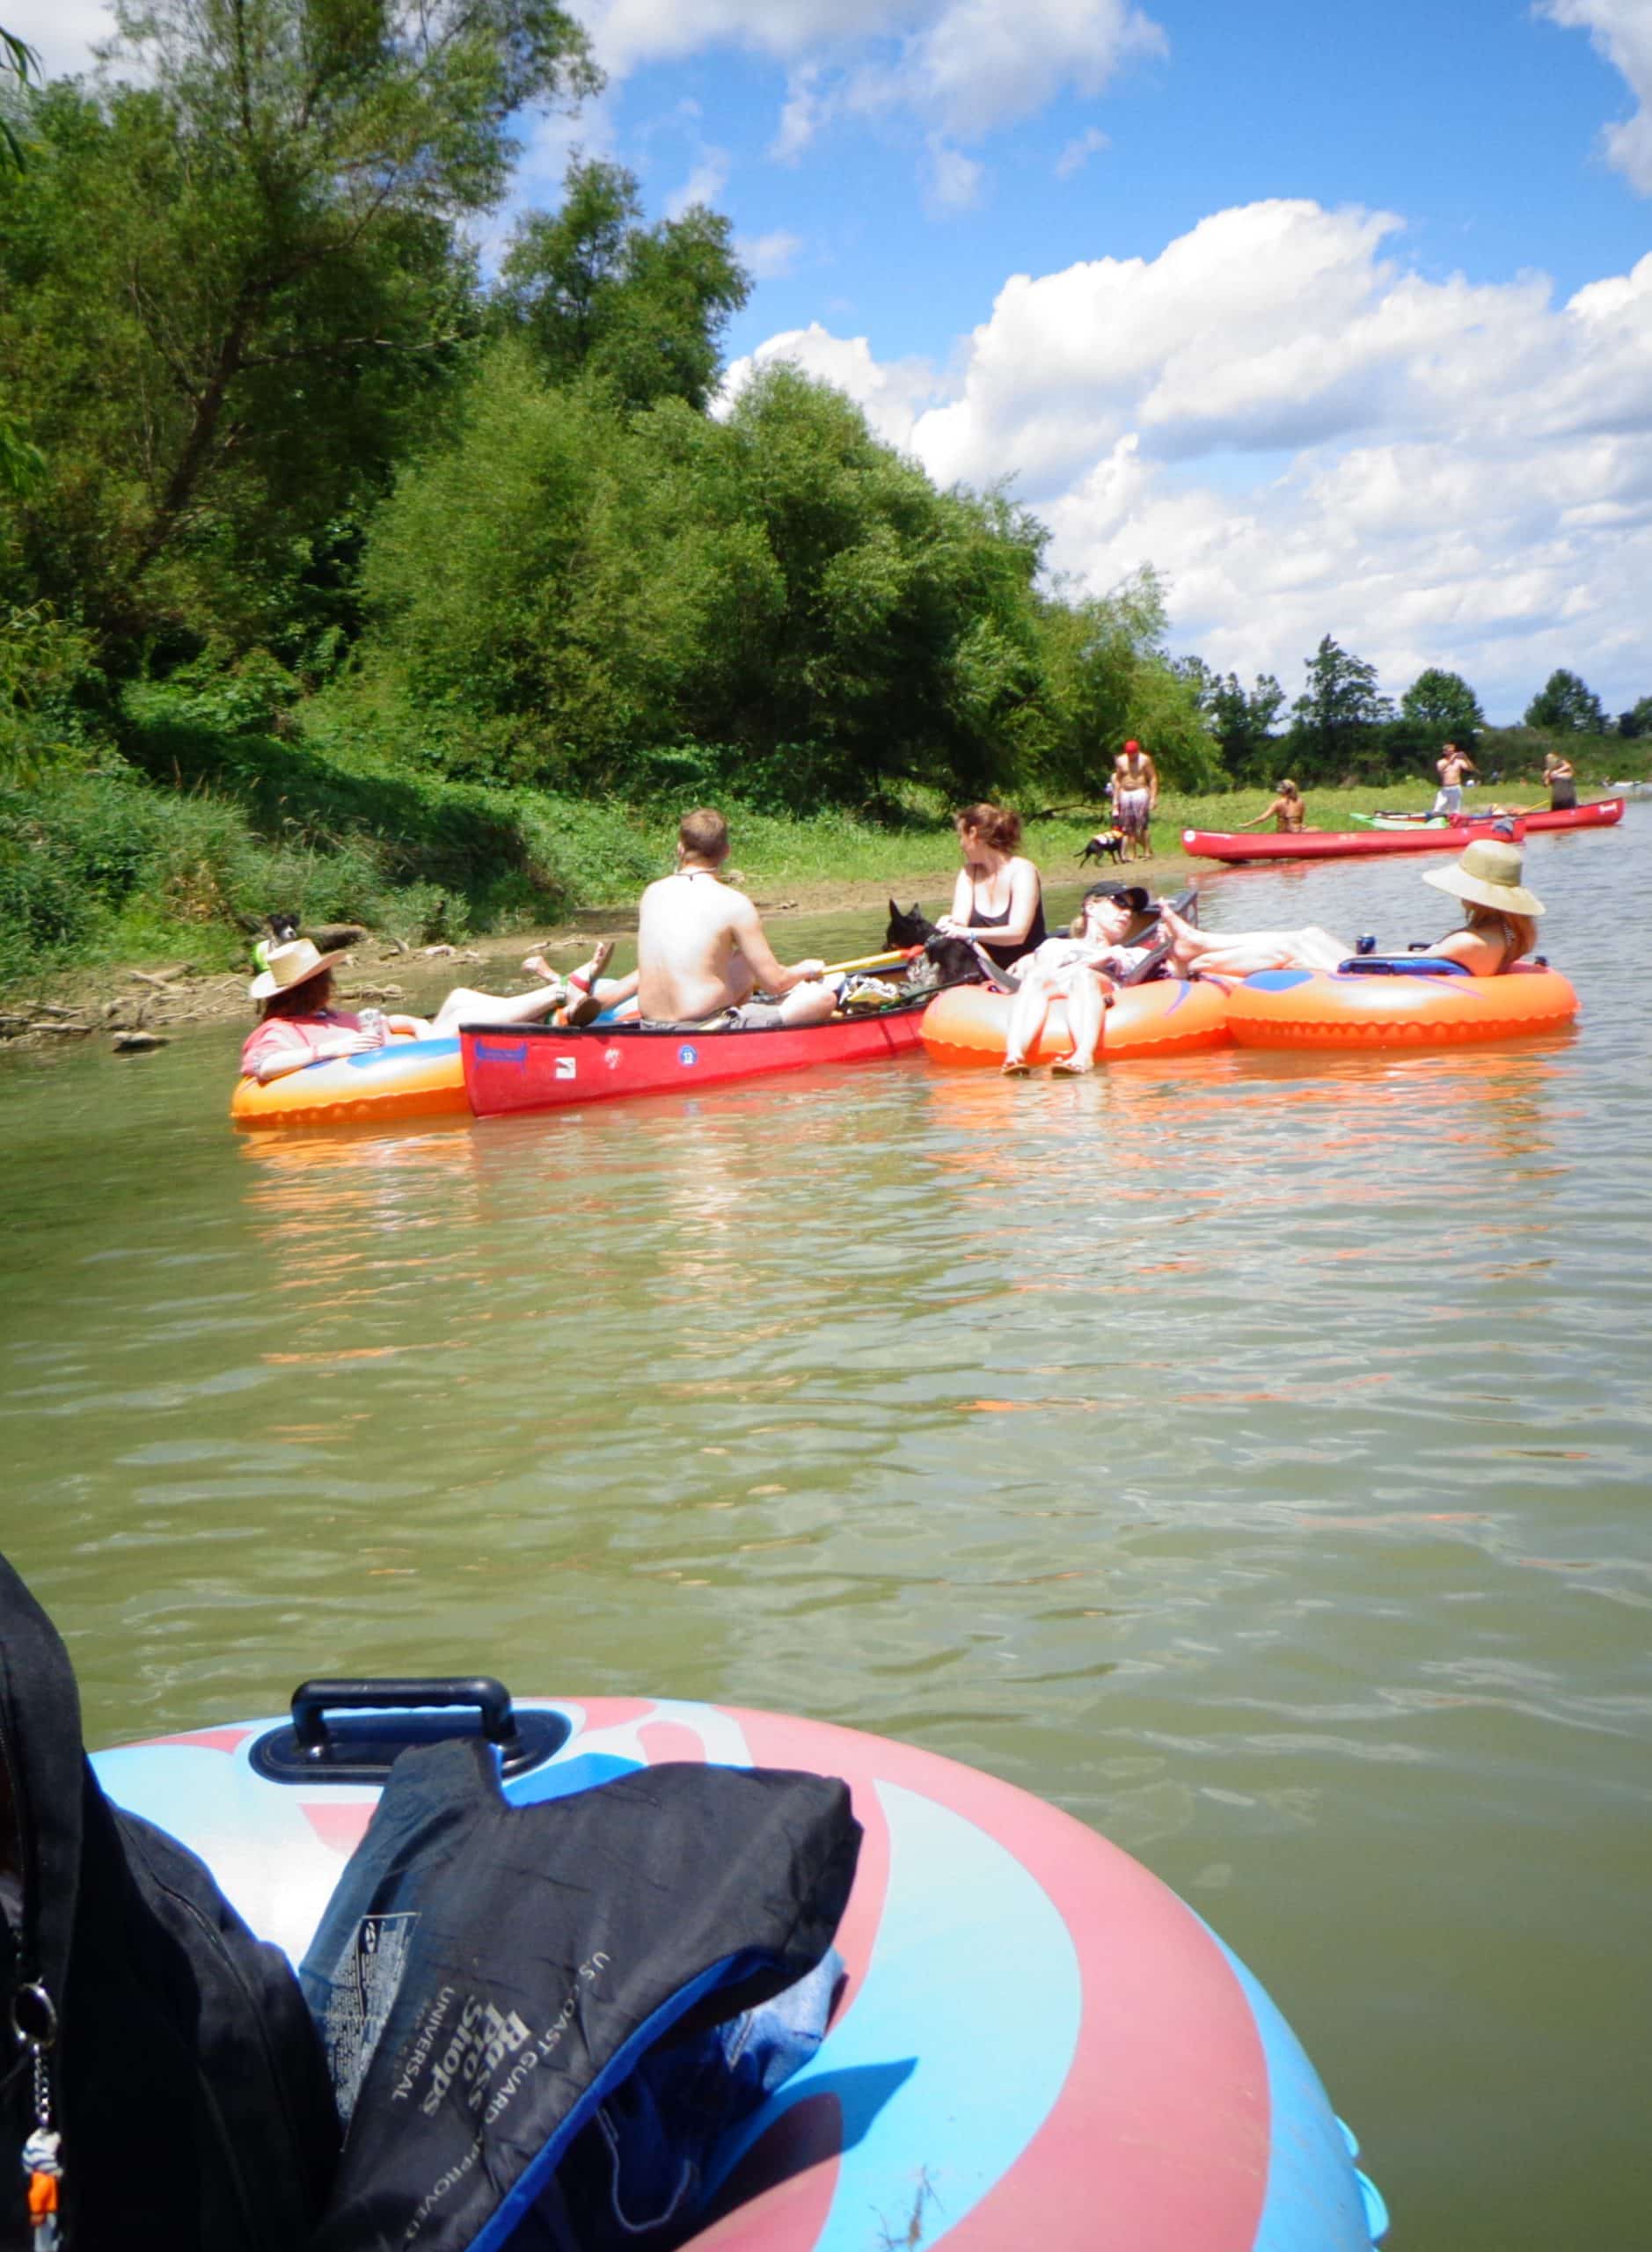 vertical photo showing a group of people in river tubes, dinghies and canoes by the bank of a river that has trees and foliage. Part of a river tube is in the foreground with a backpack on it